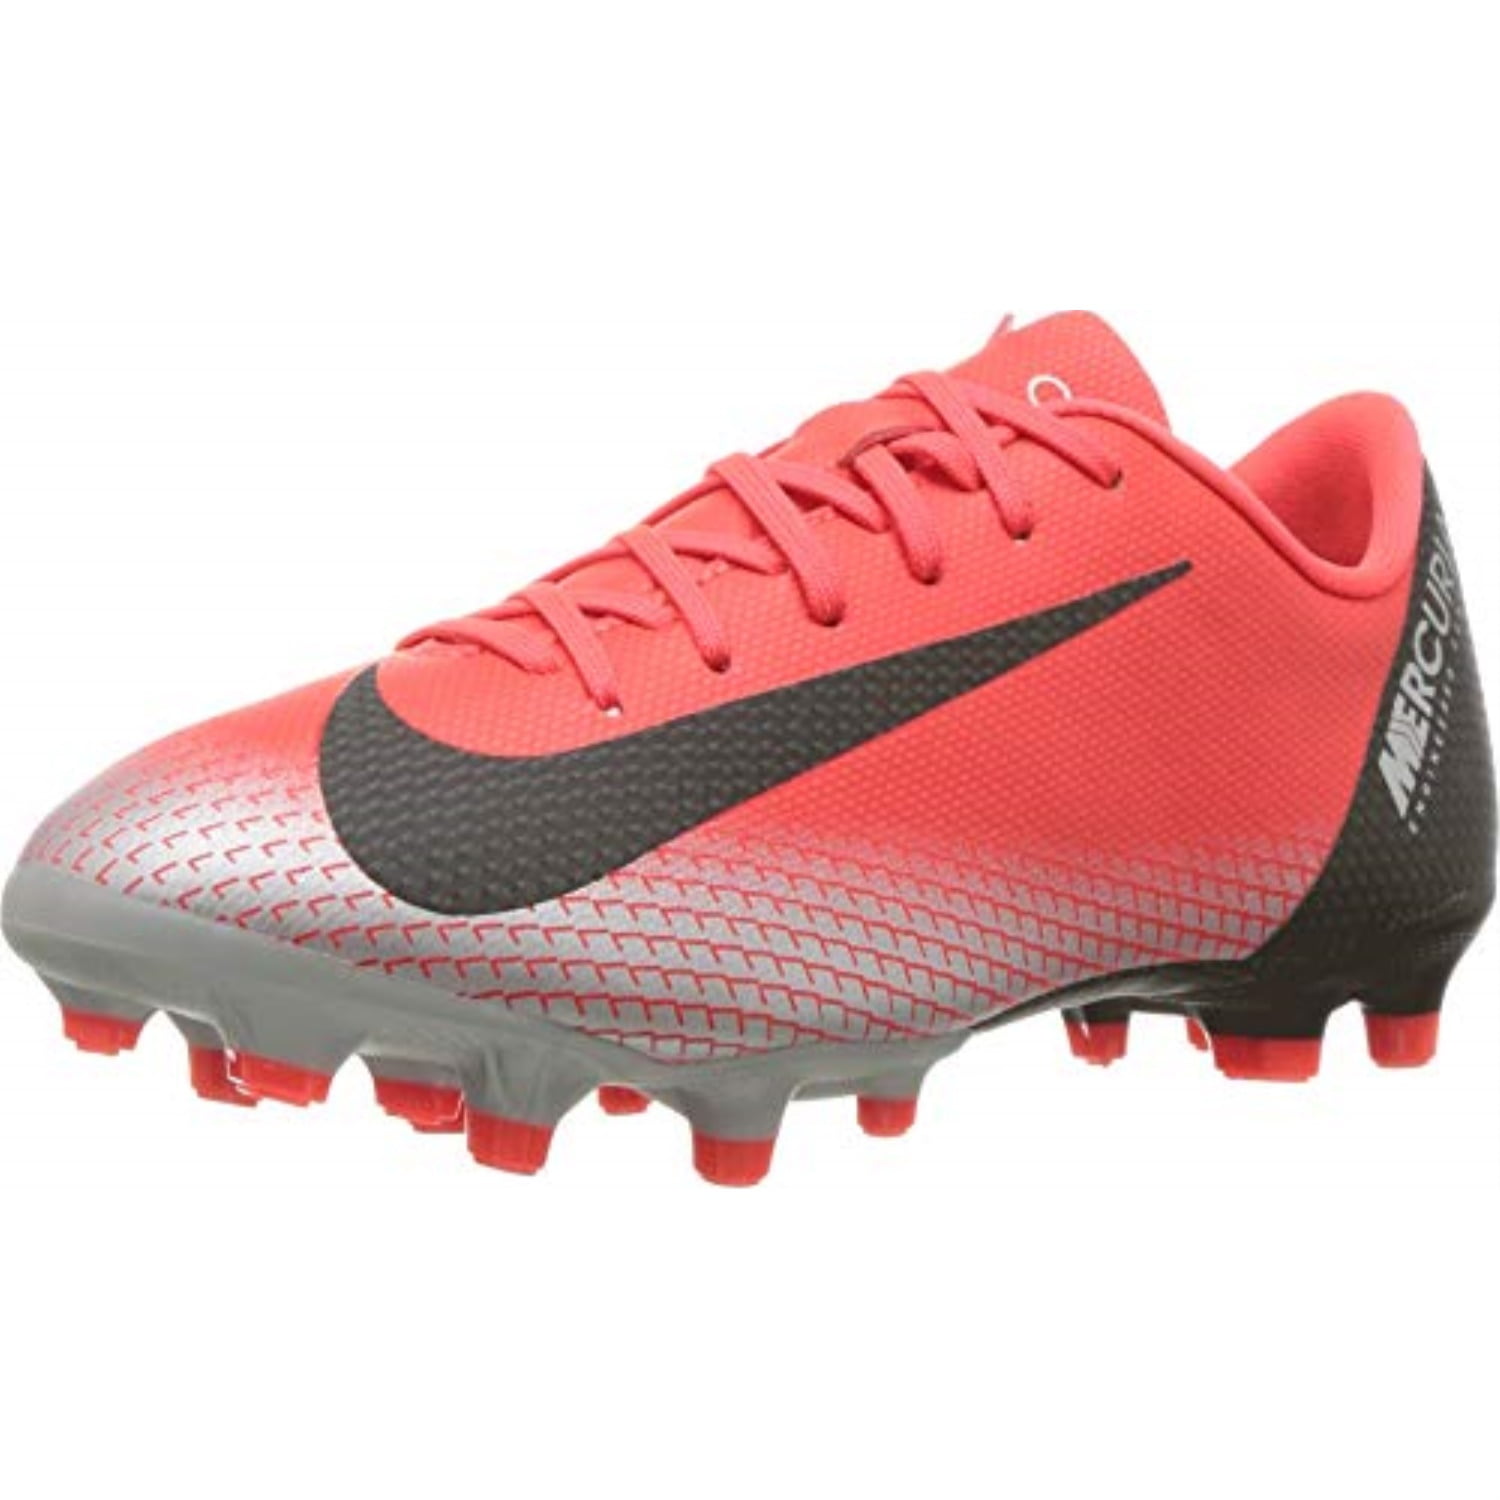 mercurial youth soccer cleats